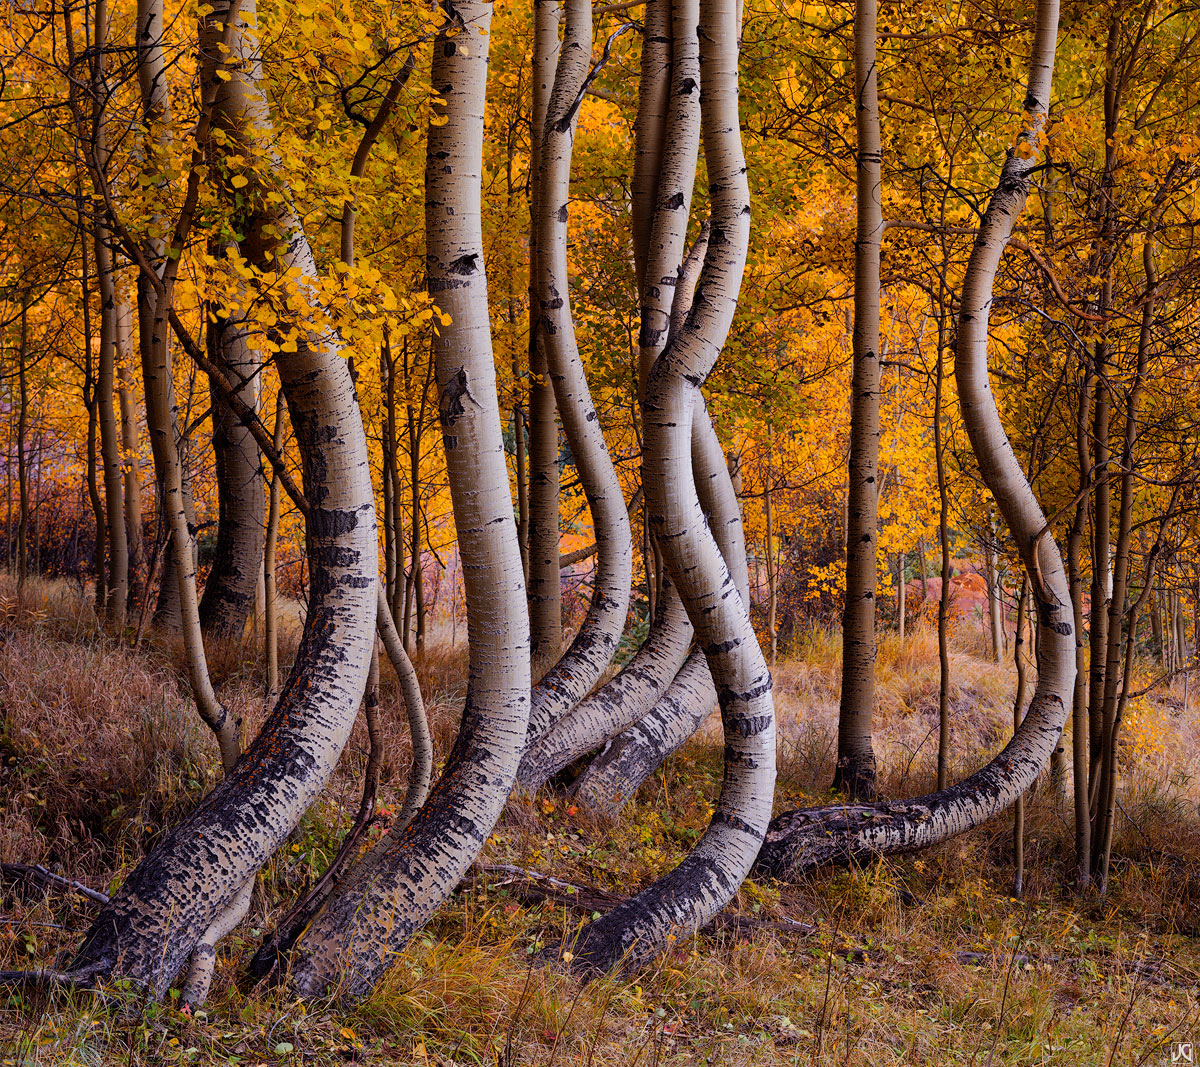 Shaped by snow and framed by fall colors, these aspen gracefully curve upwards towards the sky during the height of autumn